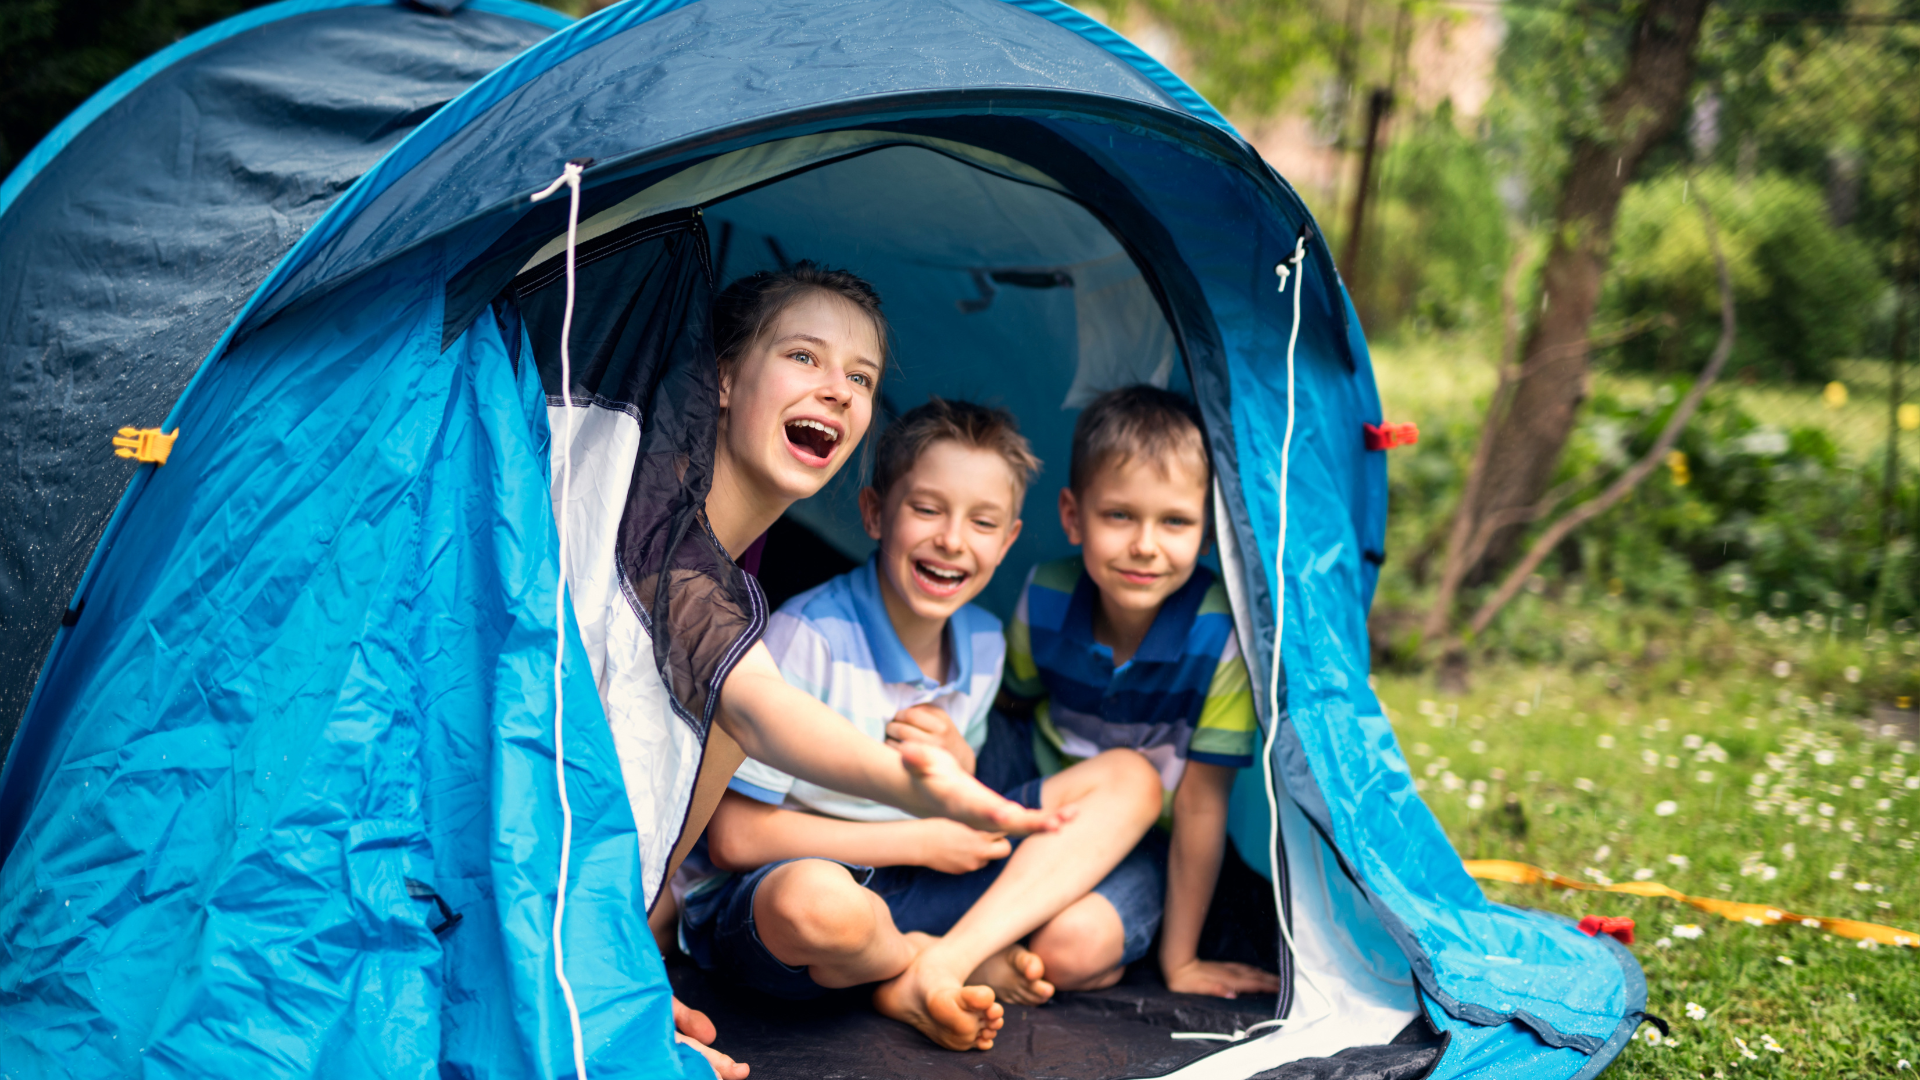 Kids sitting in tent while it rains